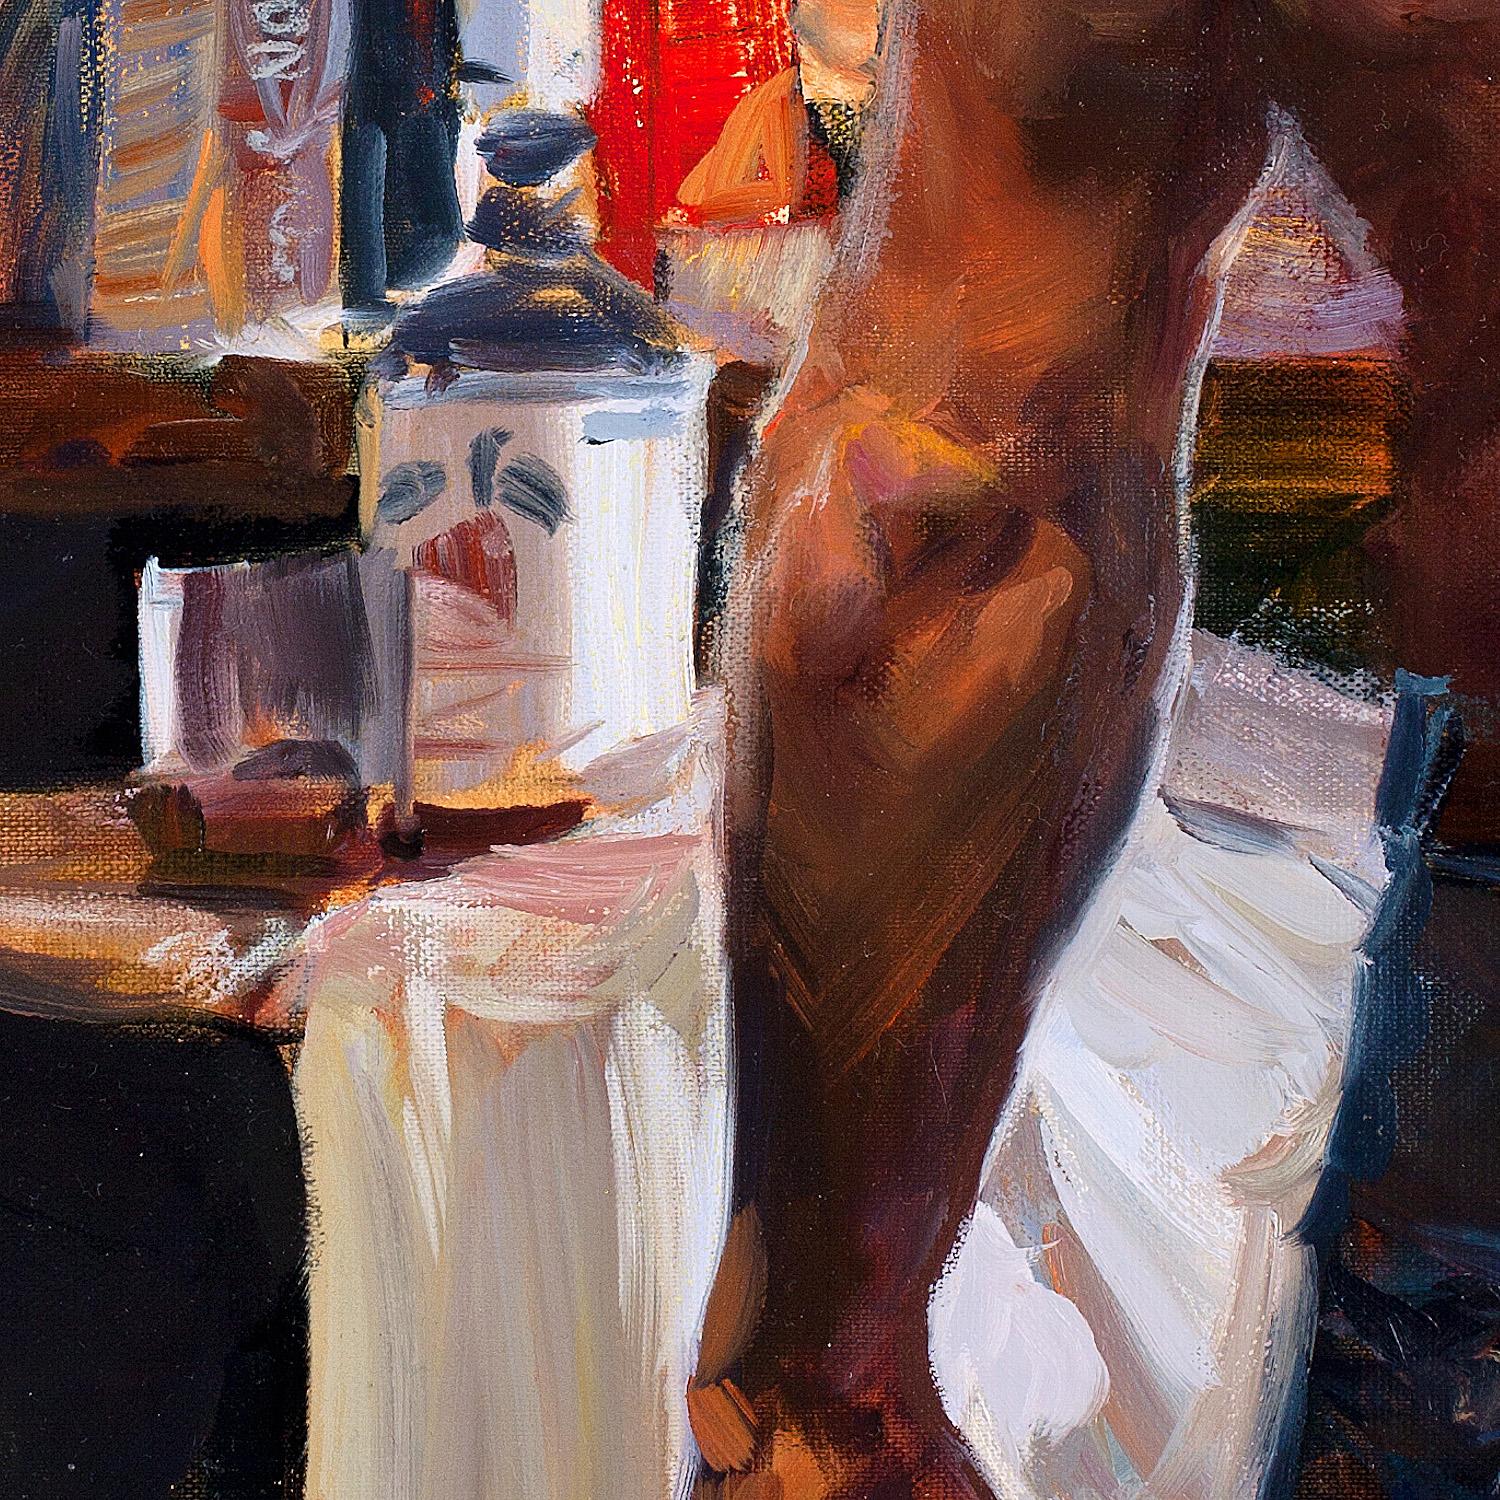 The man - Realist Painting by Evgeniy Monahov